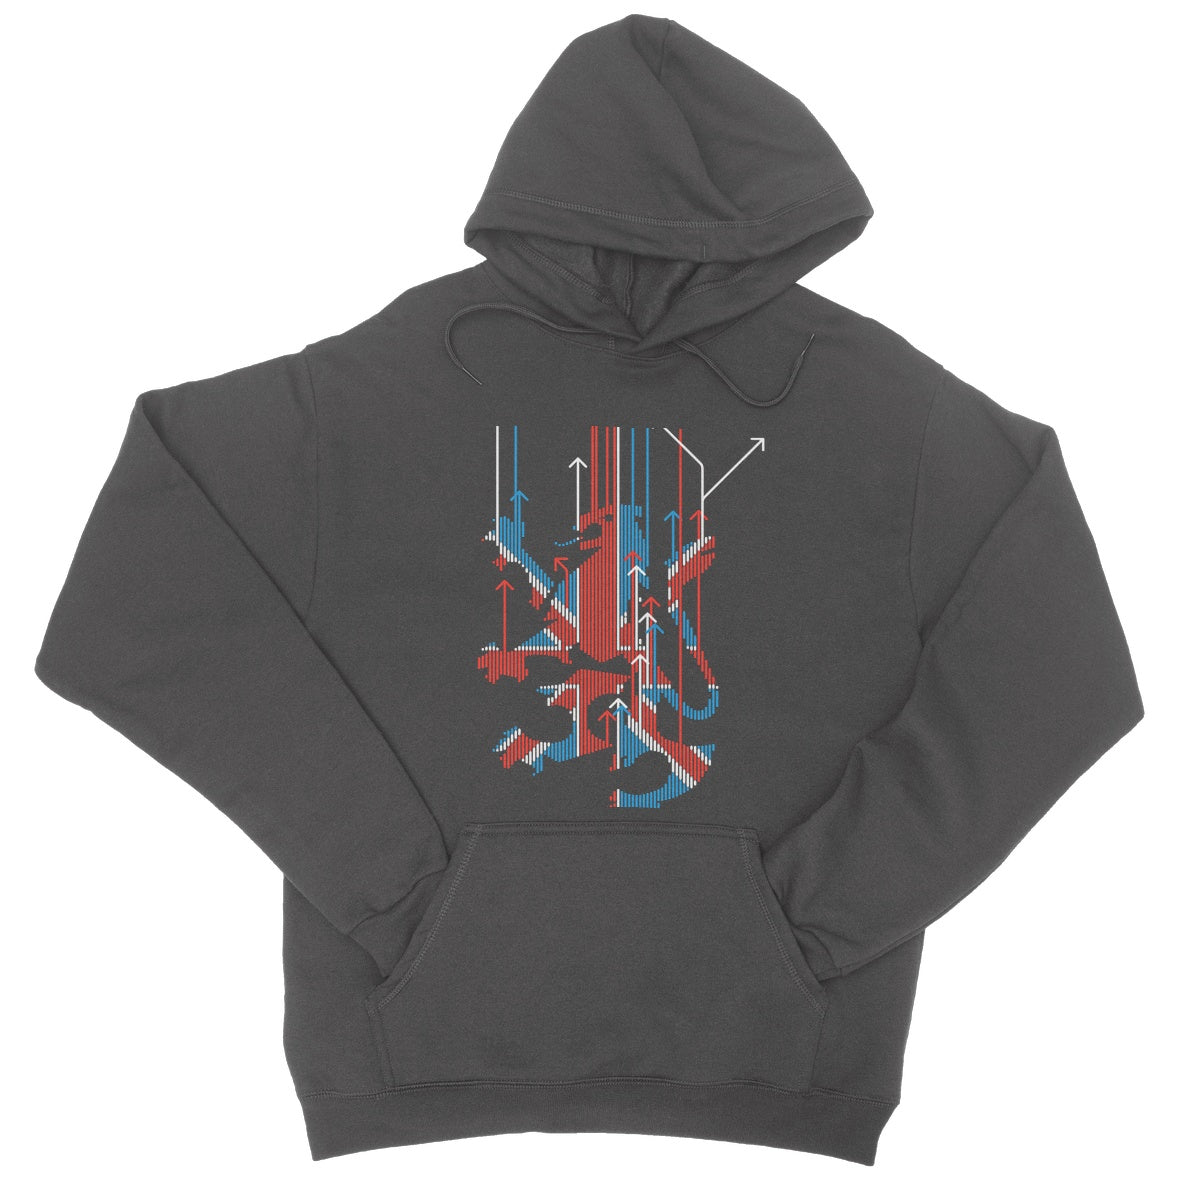 Union Jacker Rules The World College Hoodie